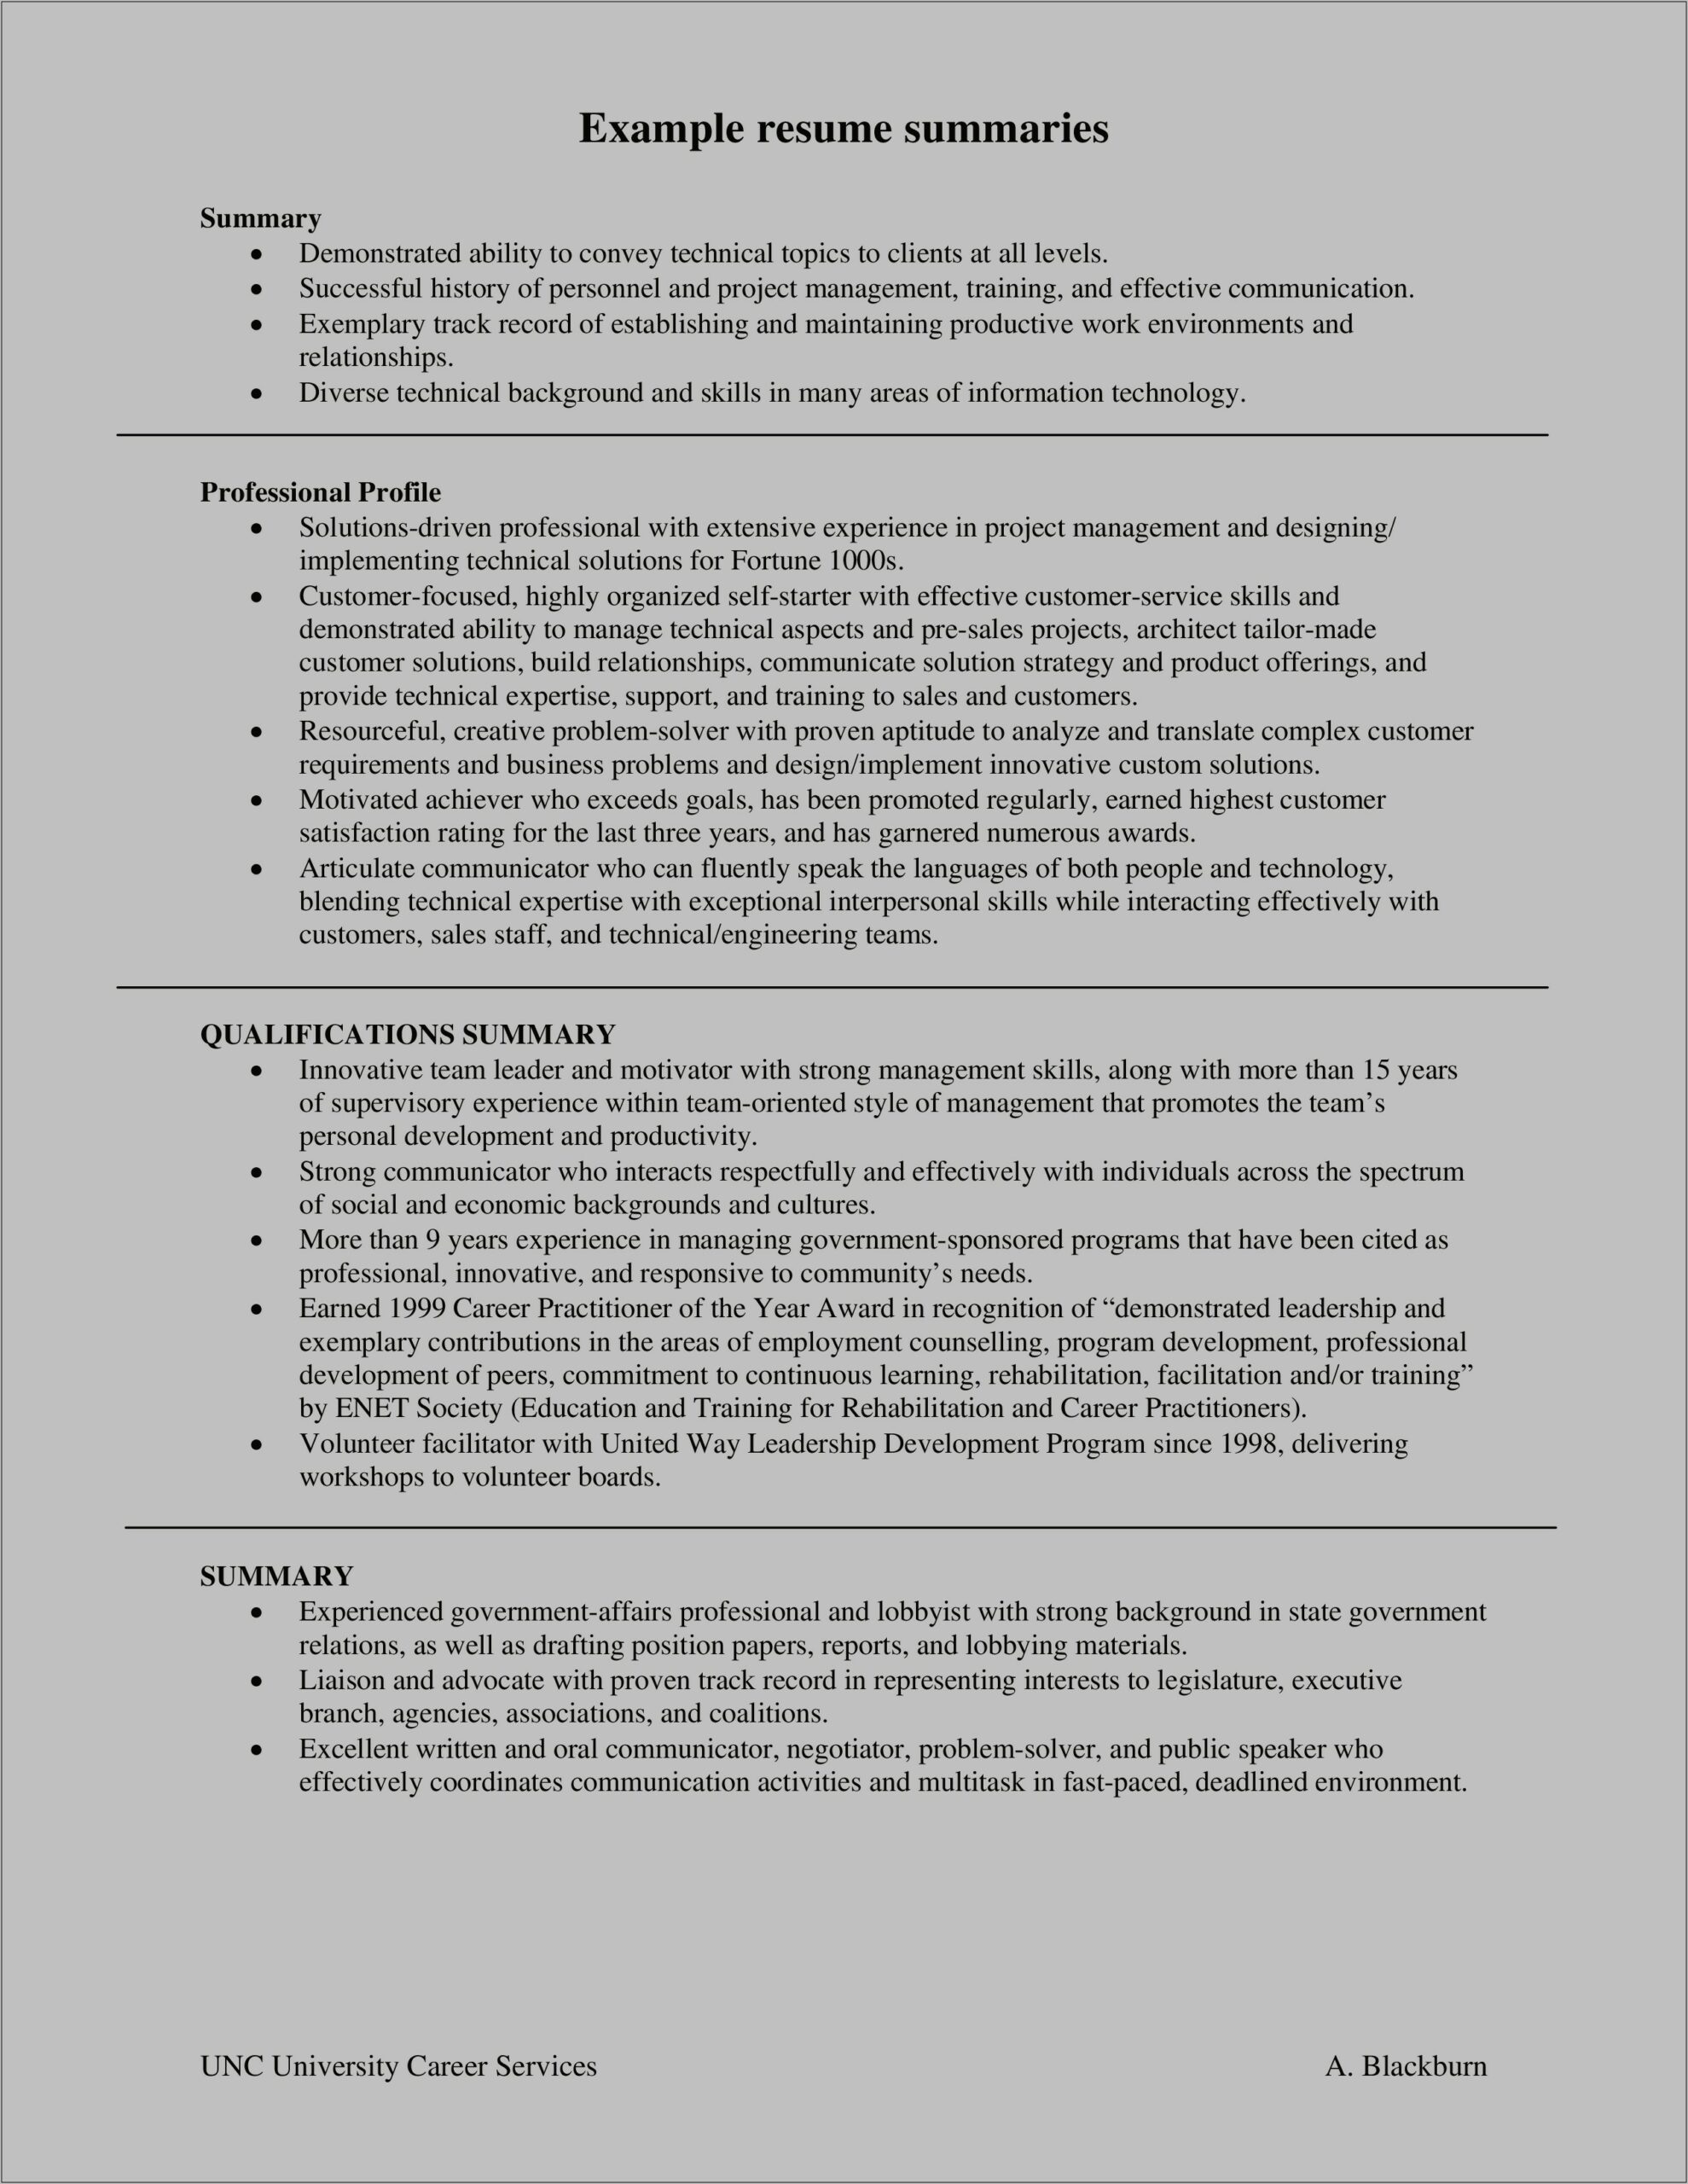 Are Professional Summaries Important On Resumes